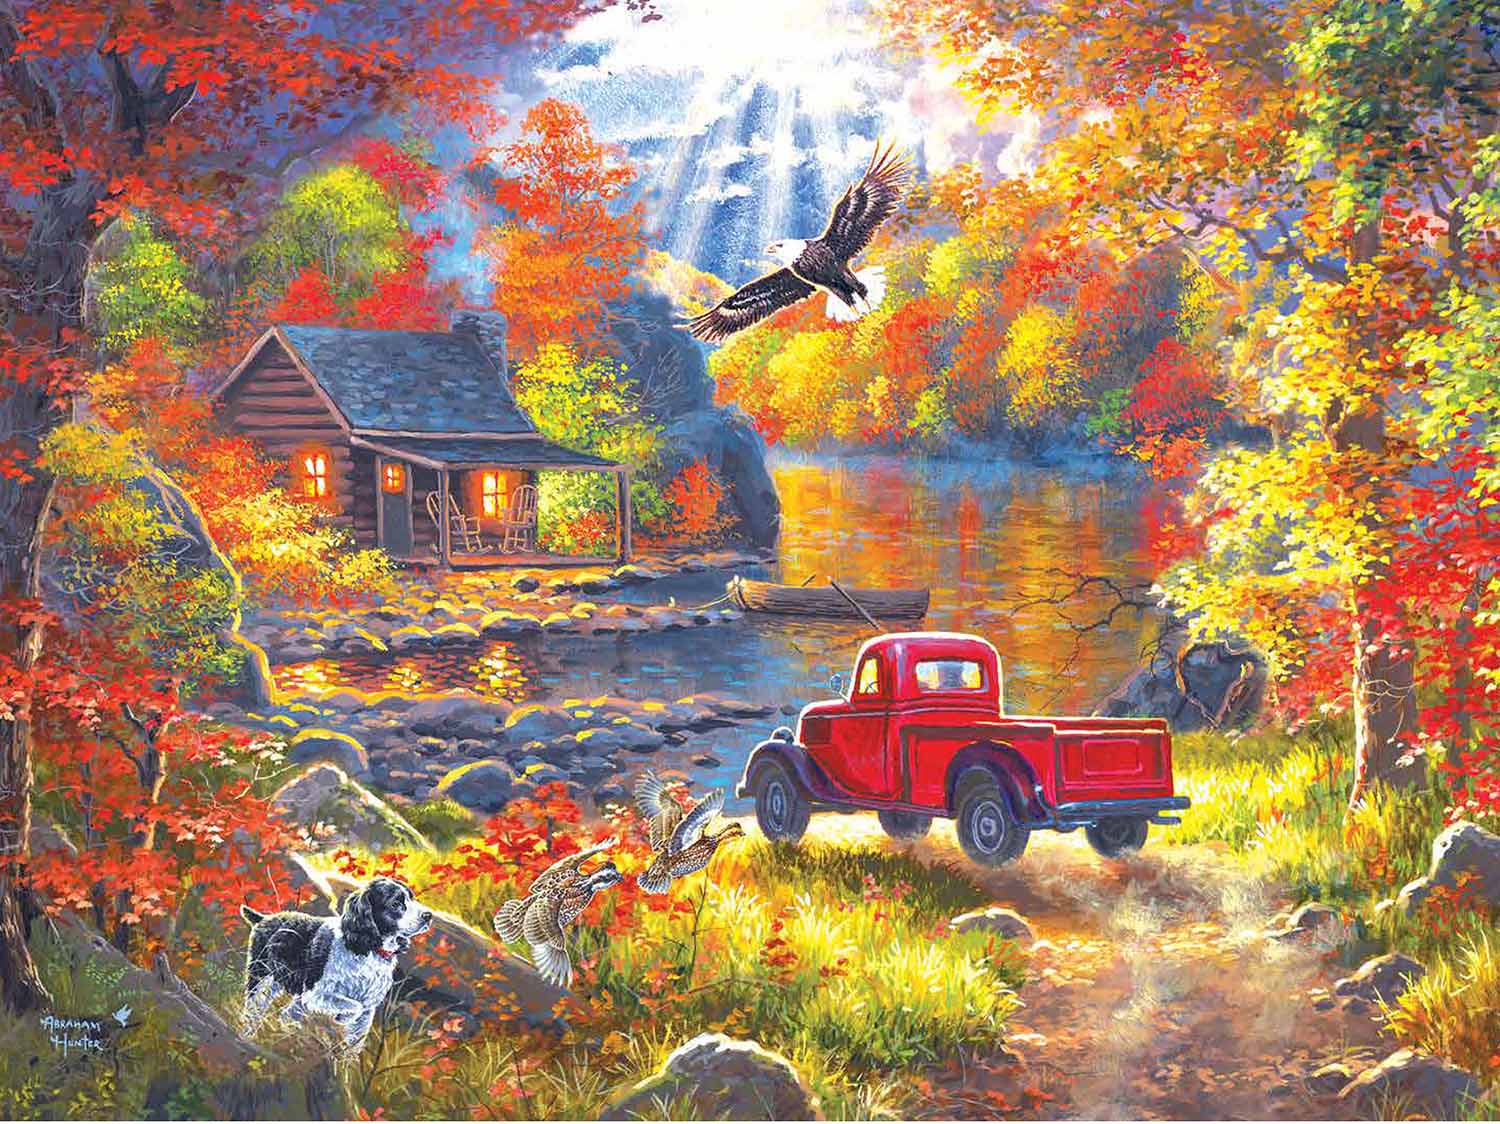 Flowers In Village Landscape Jigsaw Puzzle By Pomegranate